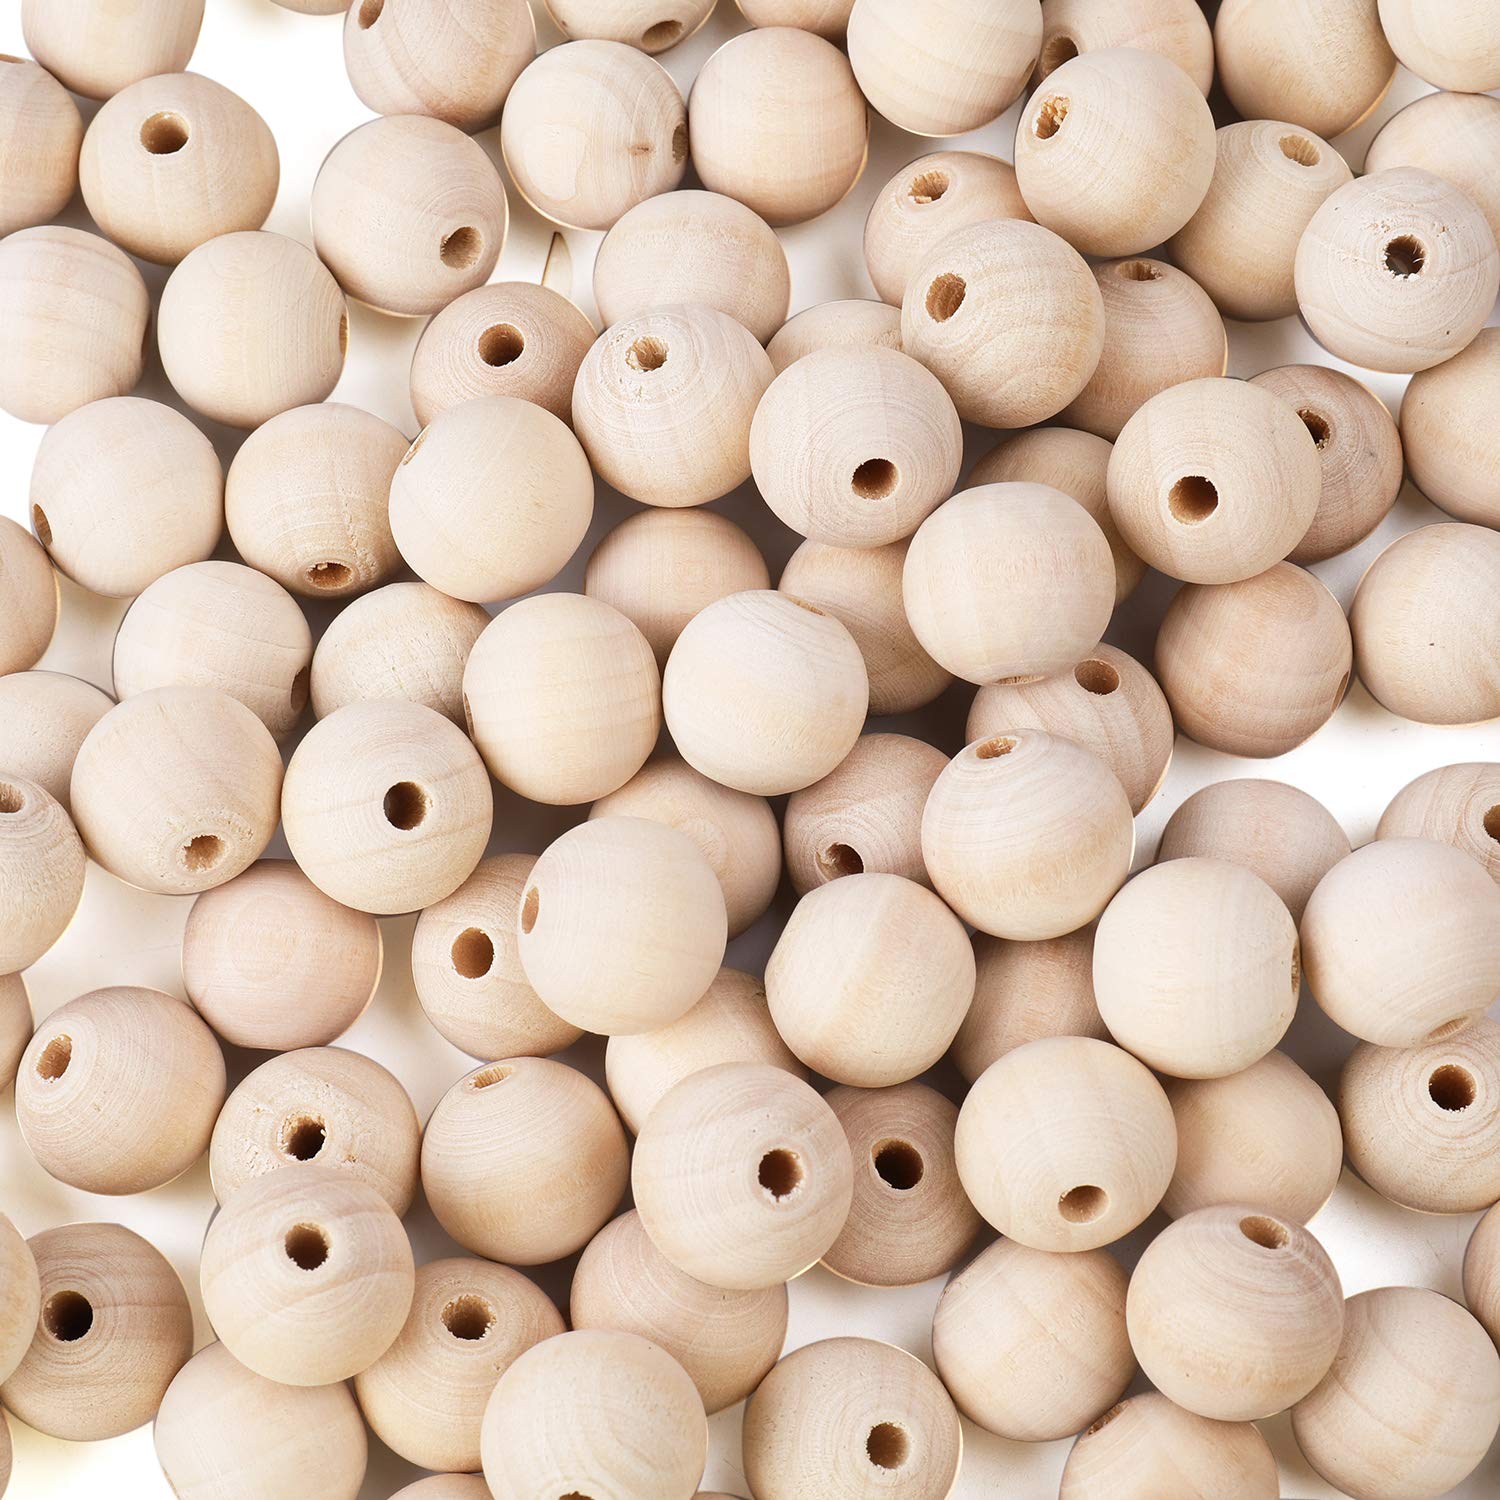 Foraineam 200pcs 20mm Natural Wood Beads Unfinished Round Wooden Loose Beads Wood Spacer Beads for Craft Making